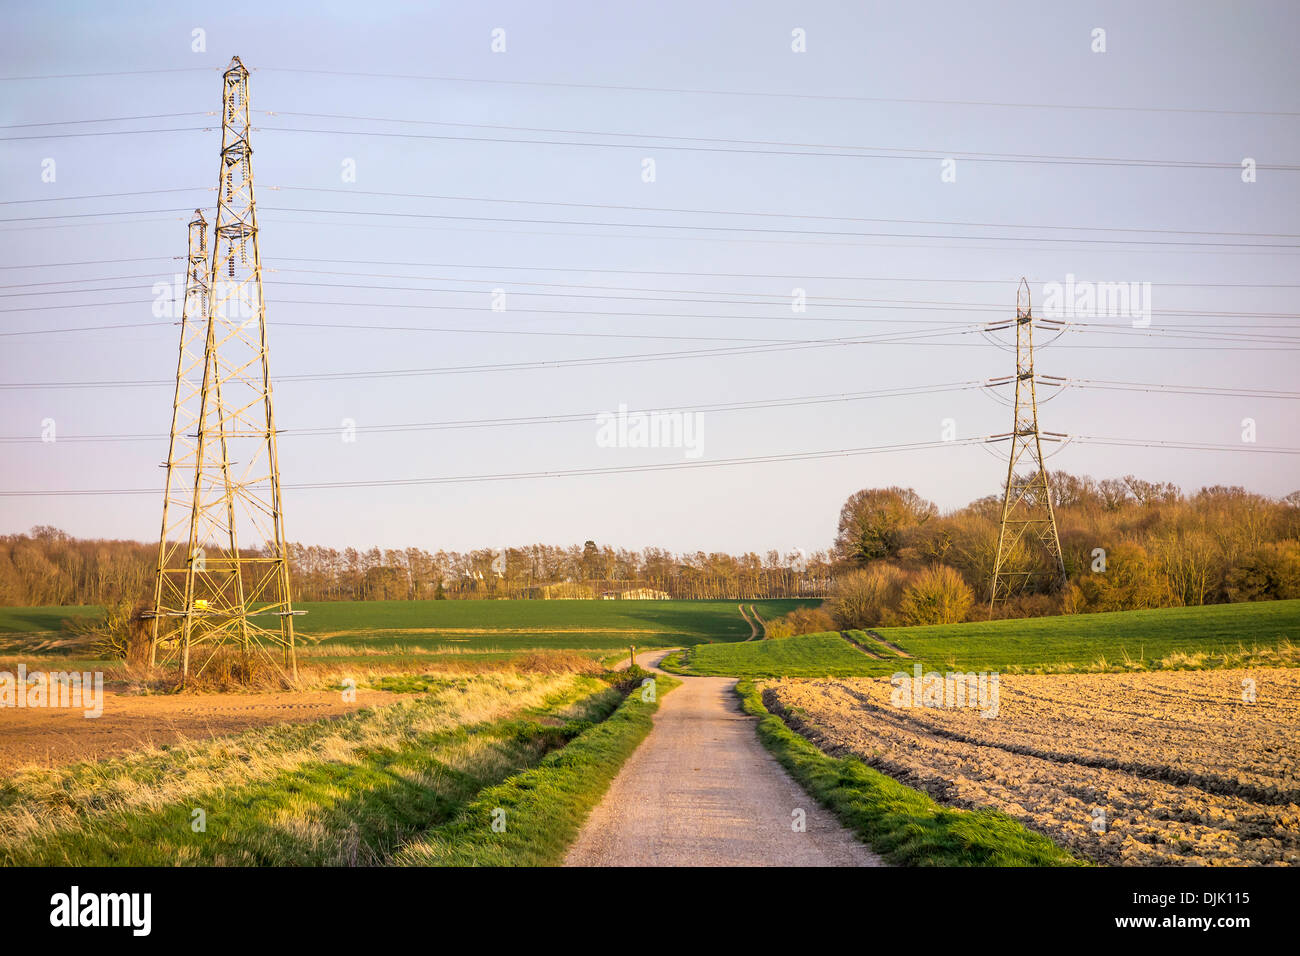 Electricity Pylons Countryside National Grid Evening Creative Stock Photo